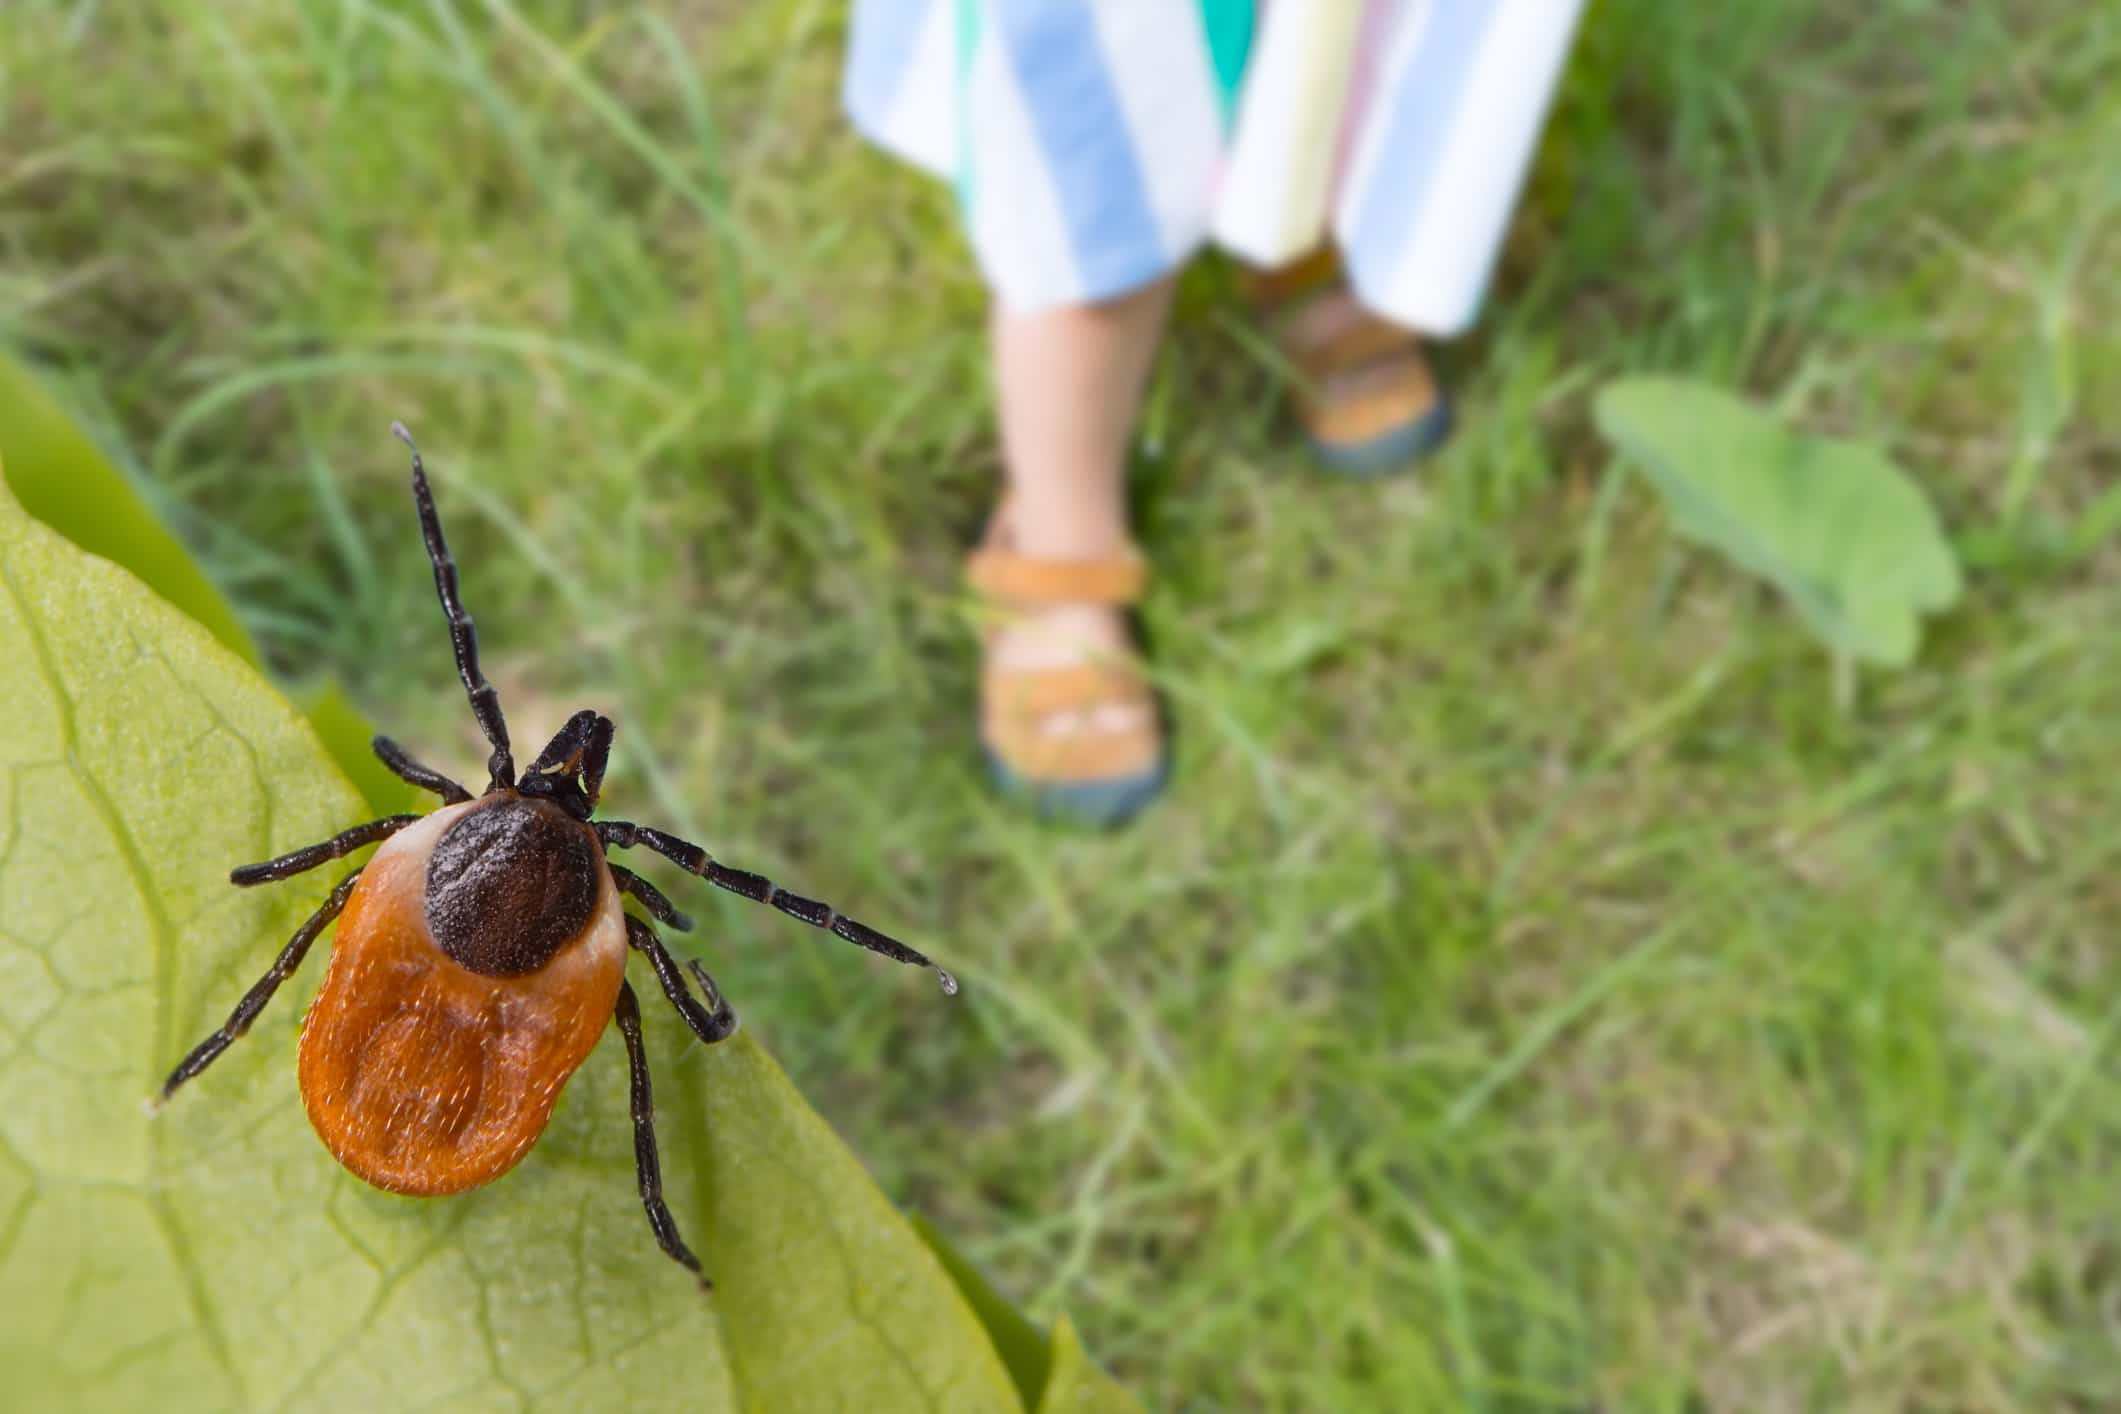 Tick sitting on a leaf above a girl walking